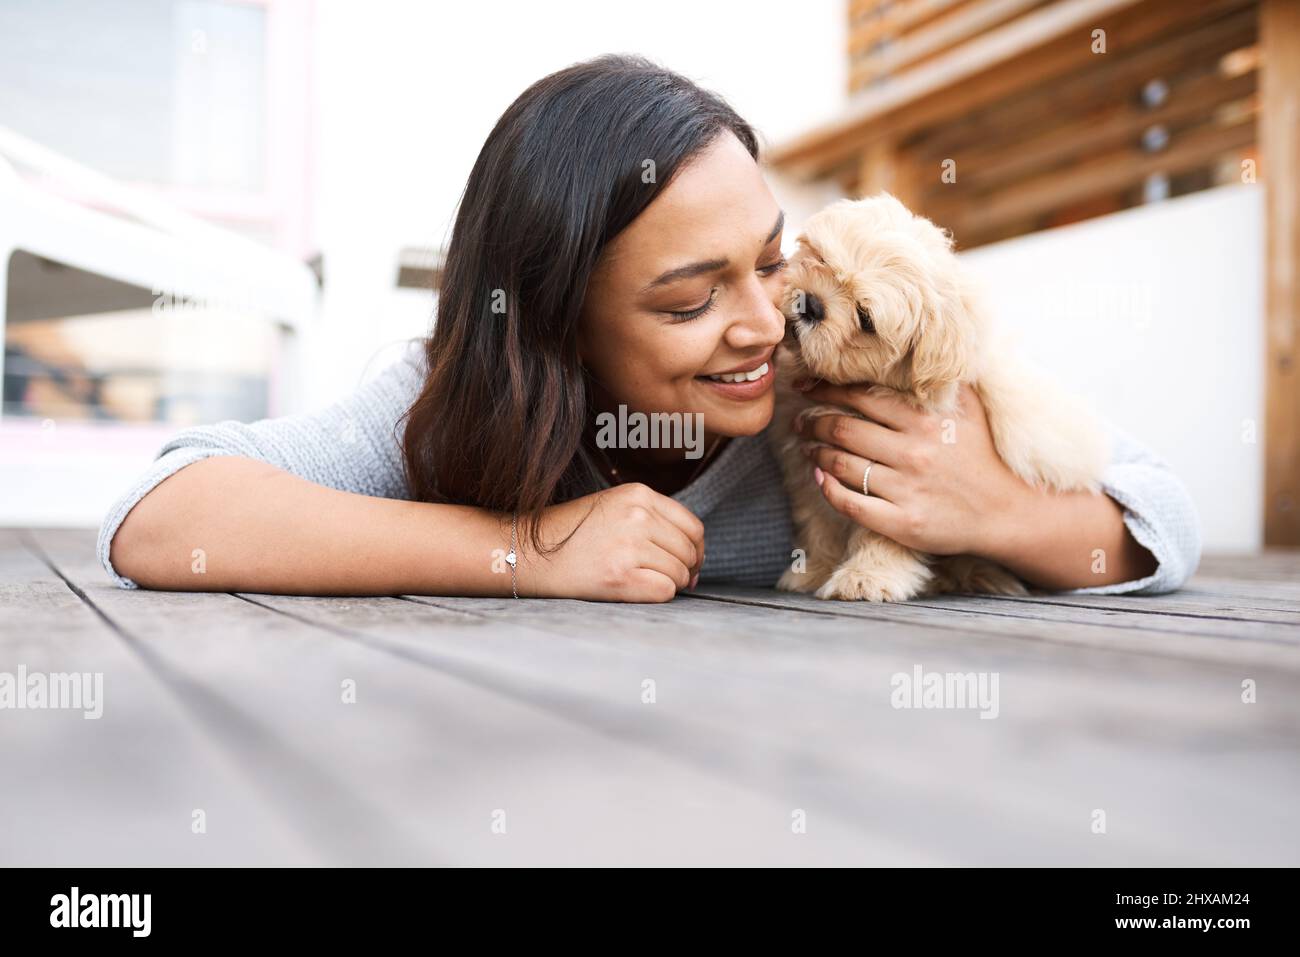 Pets dont see imperfections, only love. Shot of a young woman relaxing with  her dog on a wooden porch outdoors Stock Photo - Alamy